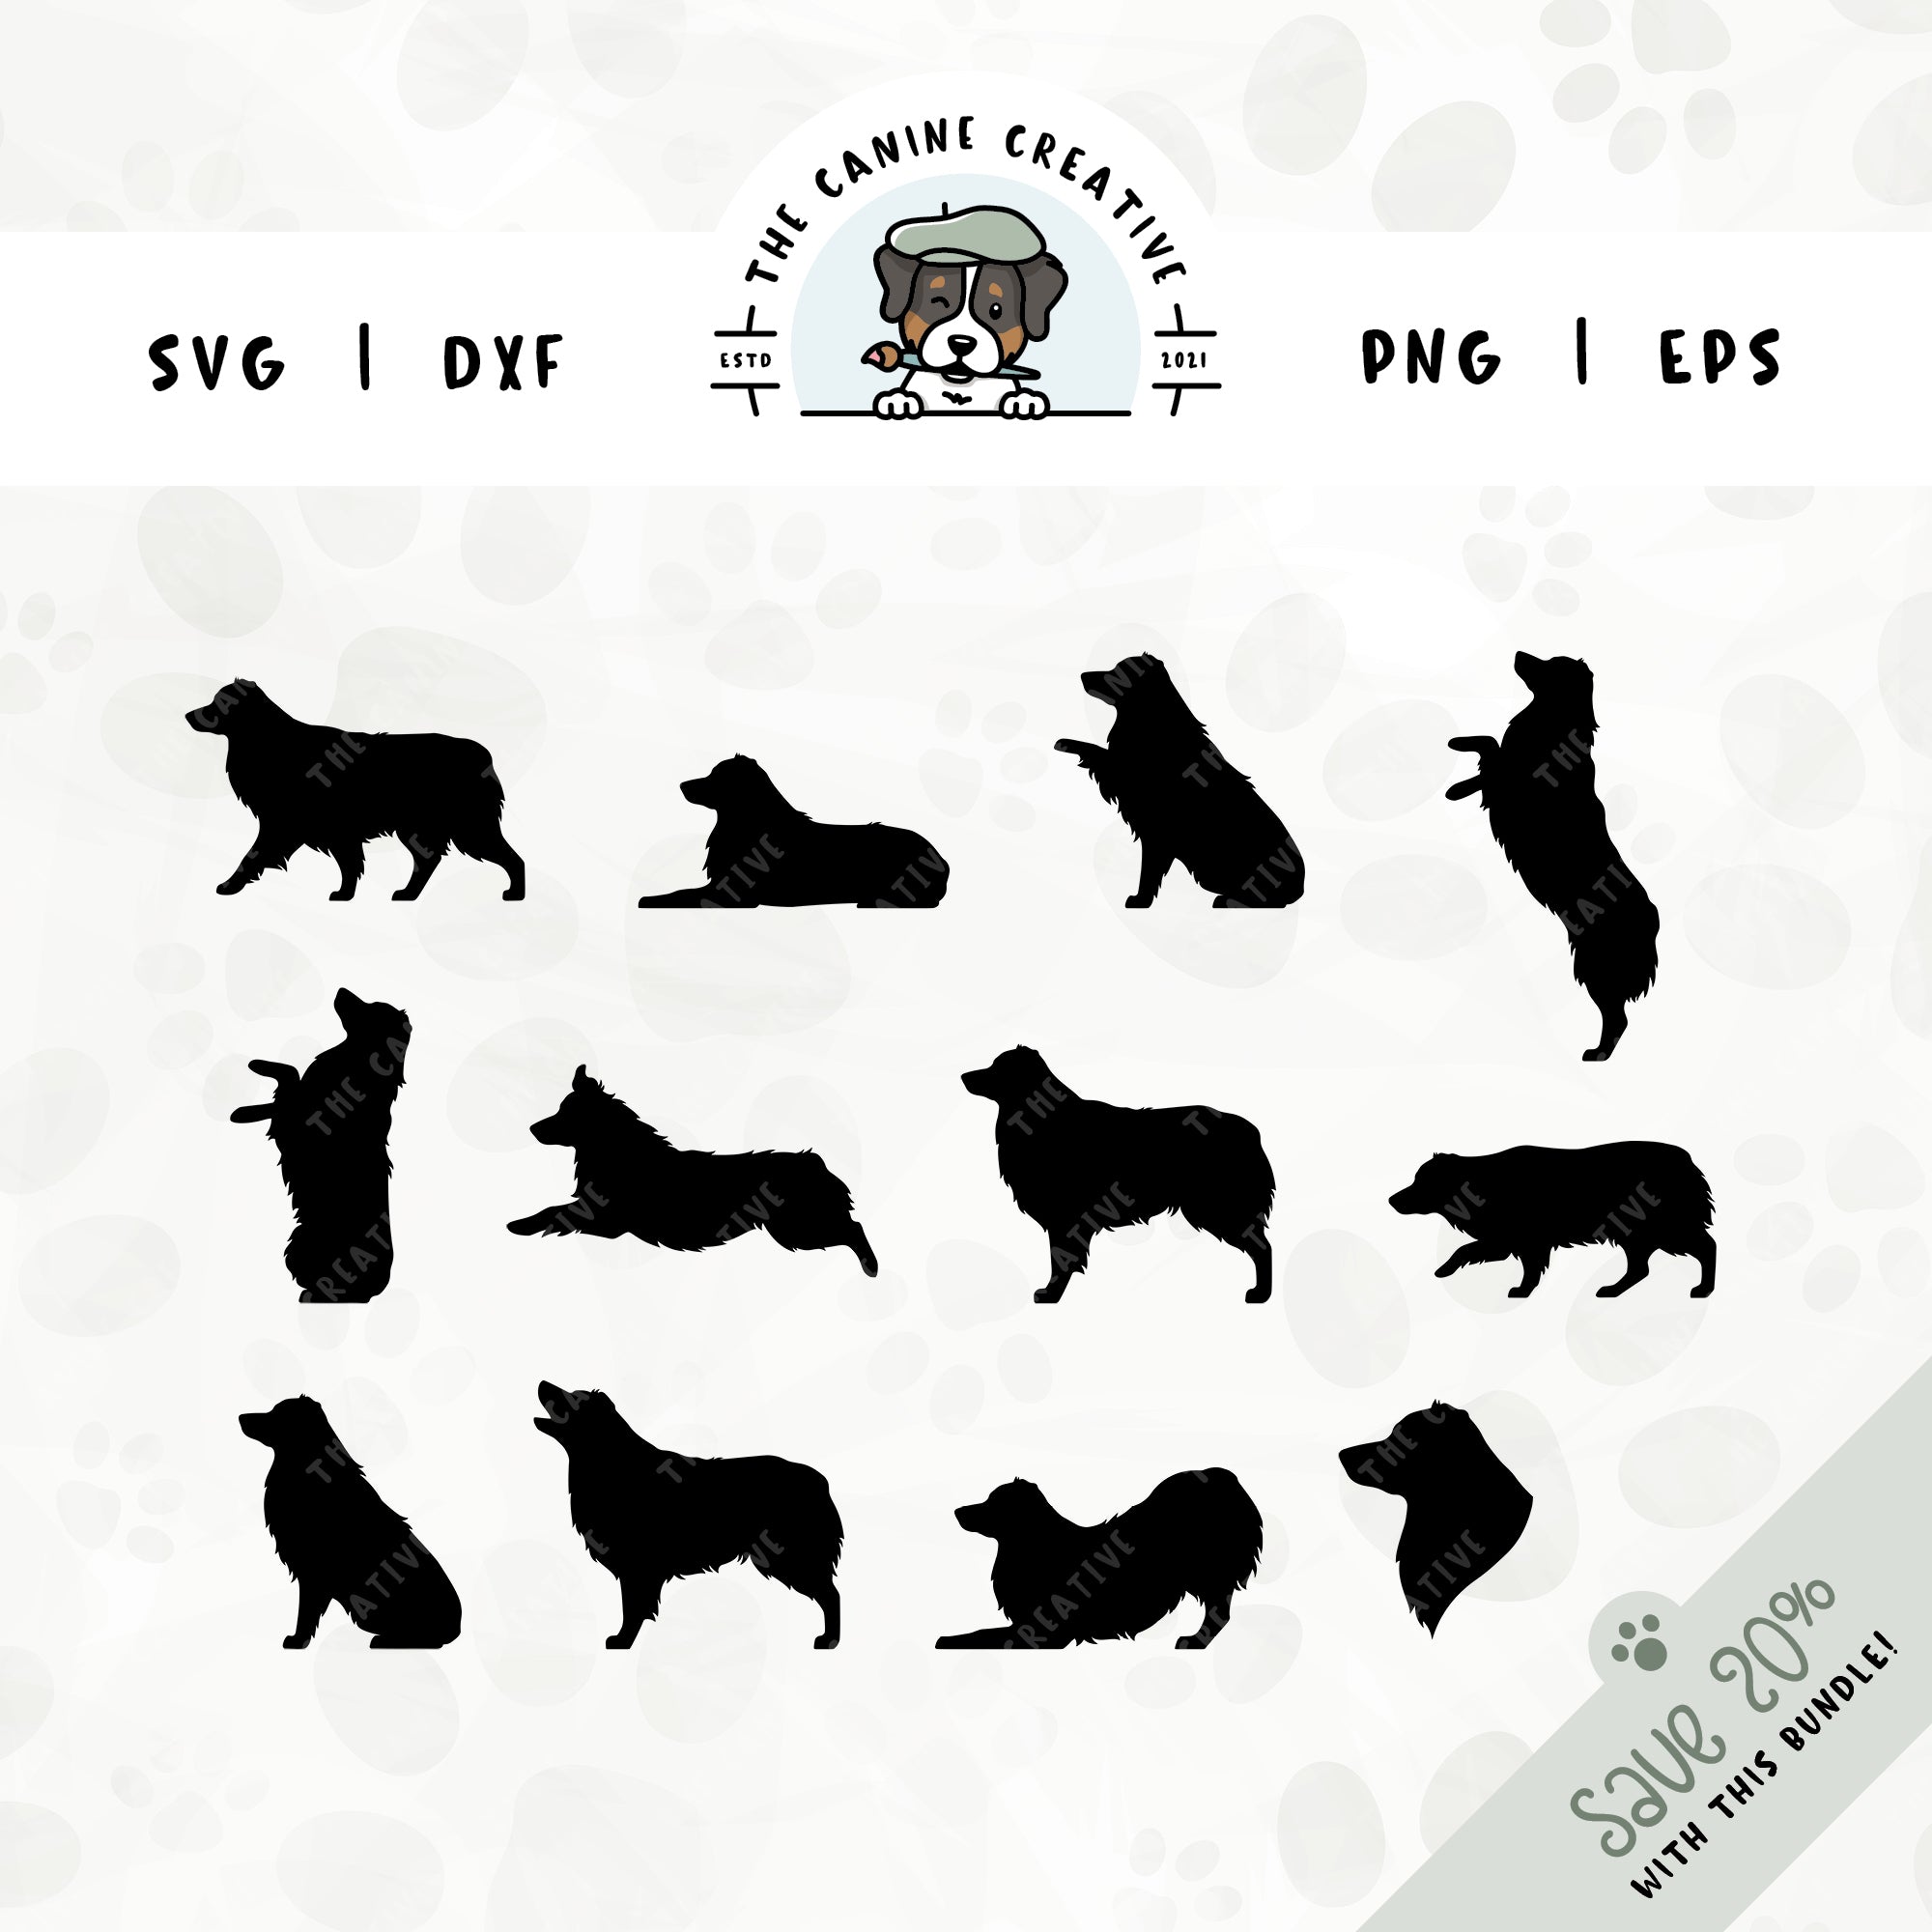 This 12-pack, docked tail Australian Shepherd silhouette bundle features a dog's head in profile, along with various poses including running, laying down, playing, standing, sitting, walking, jumping up, begging, barking, herding, and shaking a paw. File formats include: SVG, DXF, PNG, and EPS.